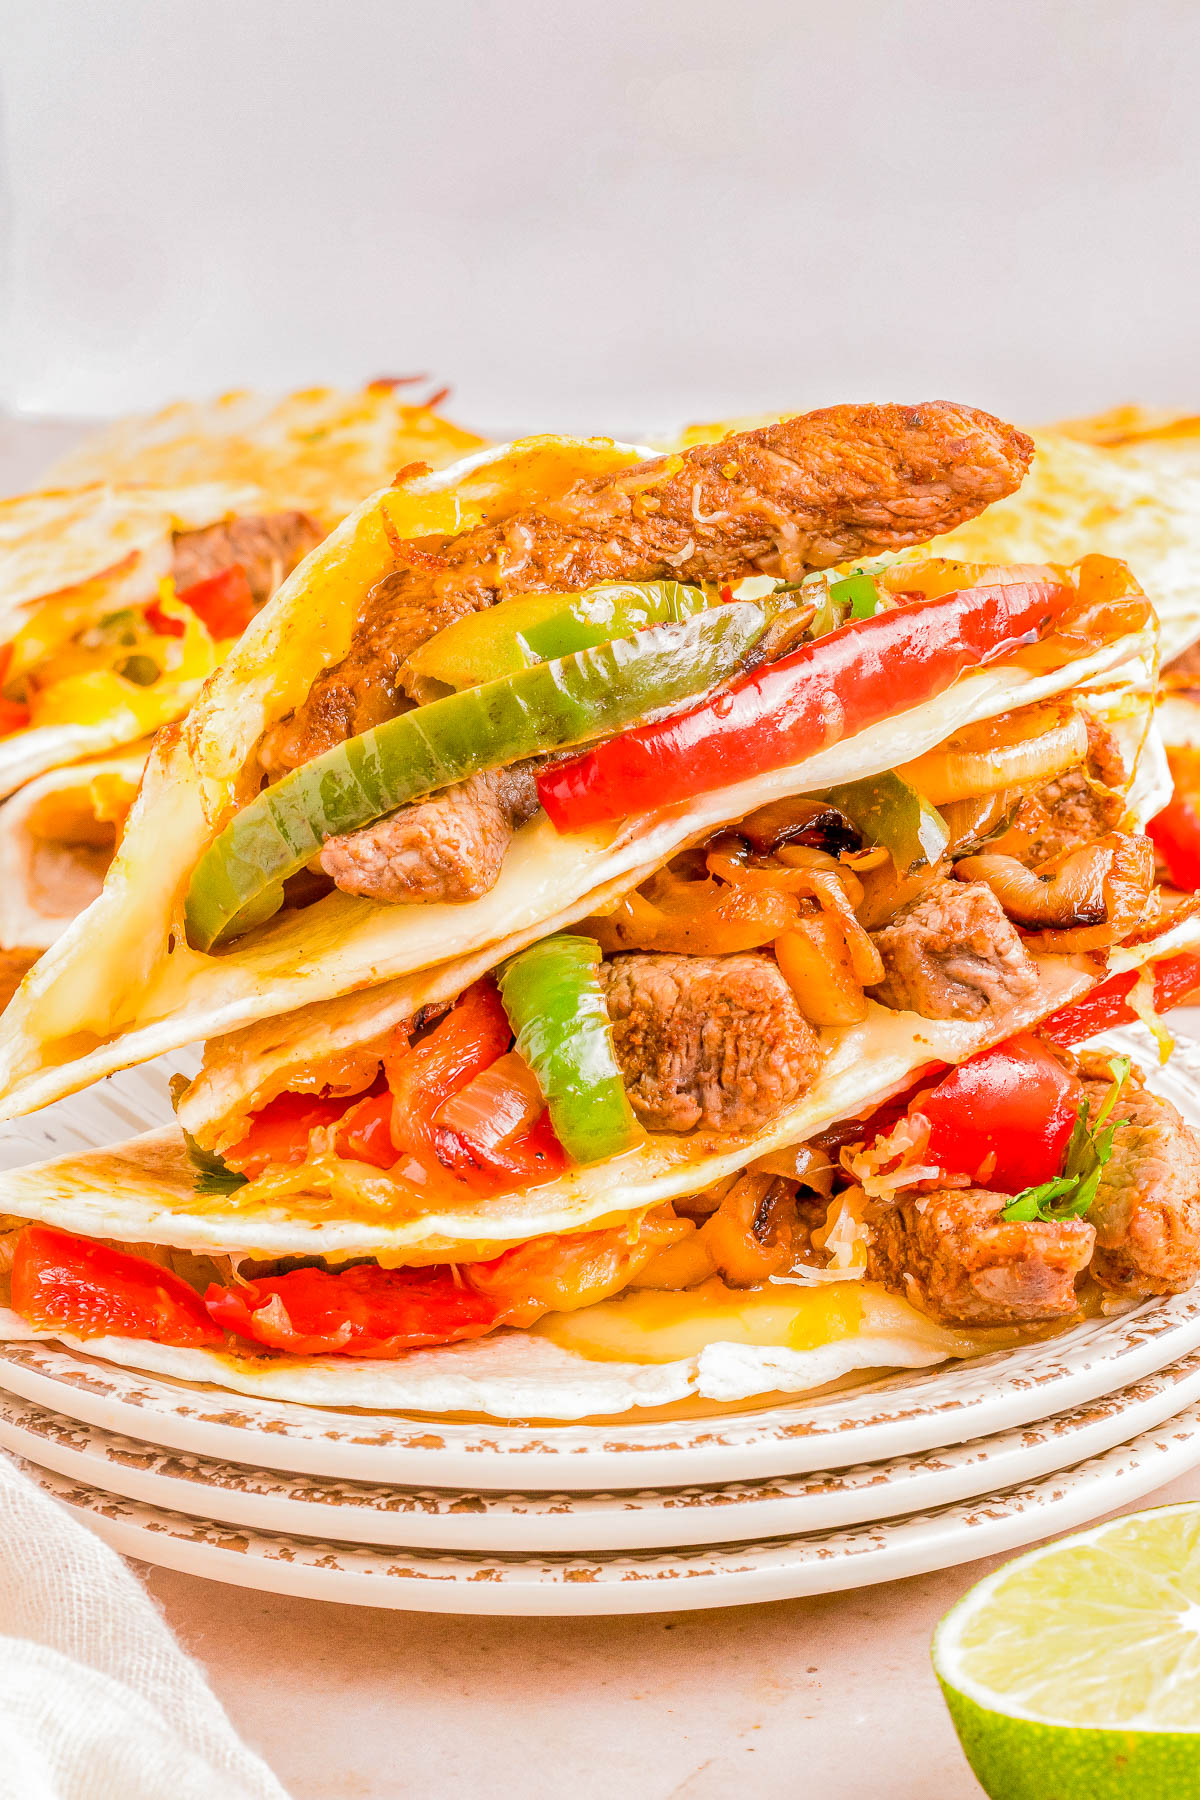 A stack of steak quesadillas with melted cheese, bell peppers, onions, on a plate, garnished with lime slices.